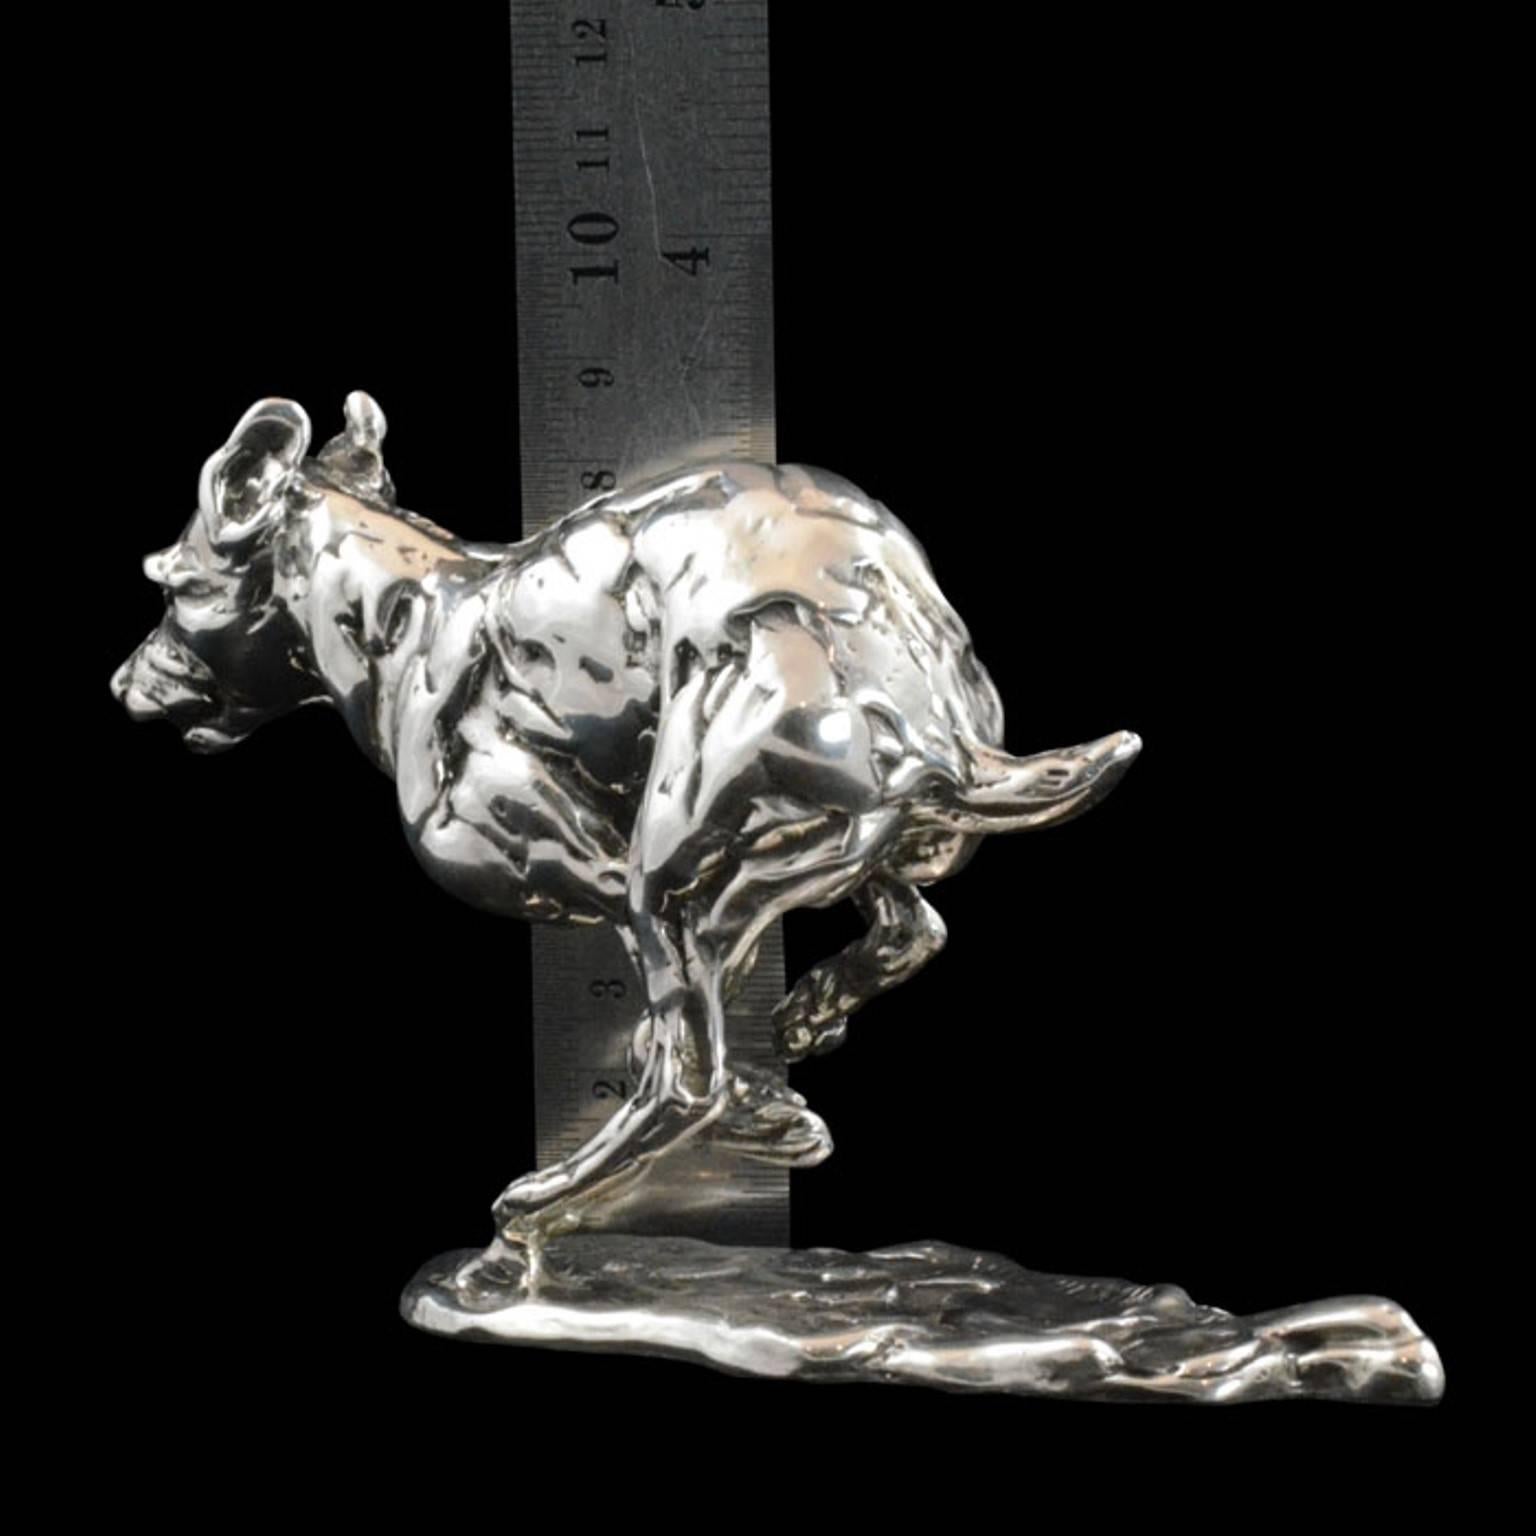 Lucy Kinsella exclusive to Hancocks
Length 17cm x height 9cm
395 grams

A 'Bunched Terrier' sterling silver sculpture by Lucy Kinsella, the limited edition finely modelled terrier races across the ground, his muscles tense and body bunched, mid